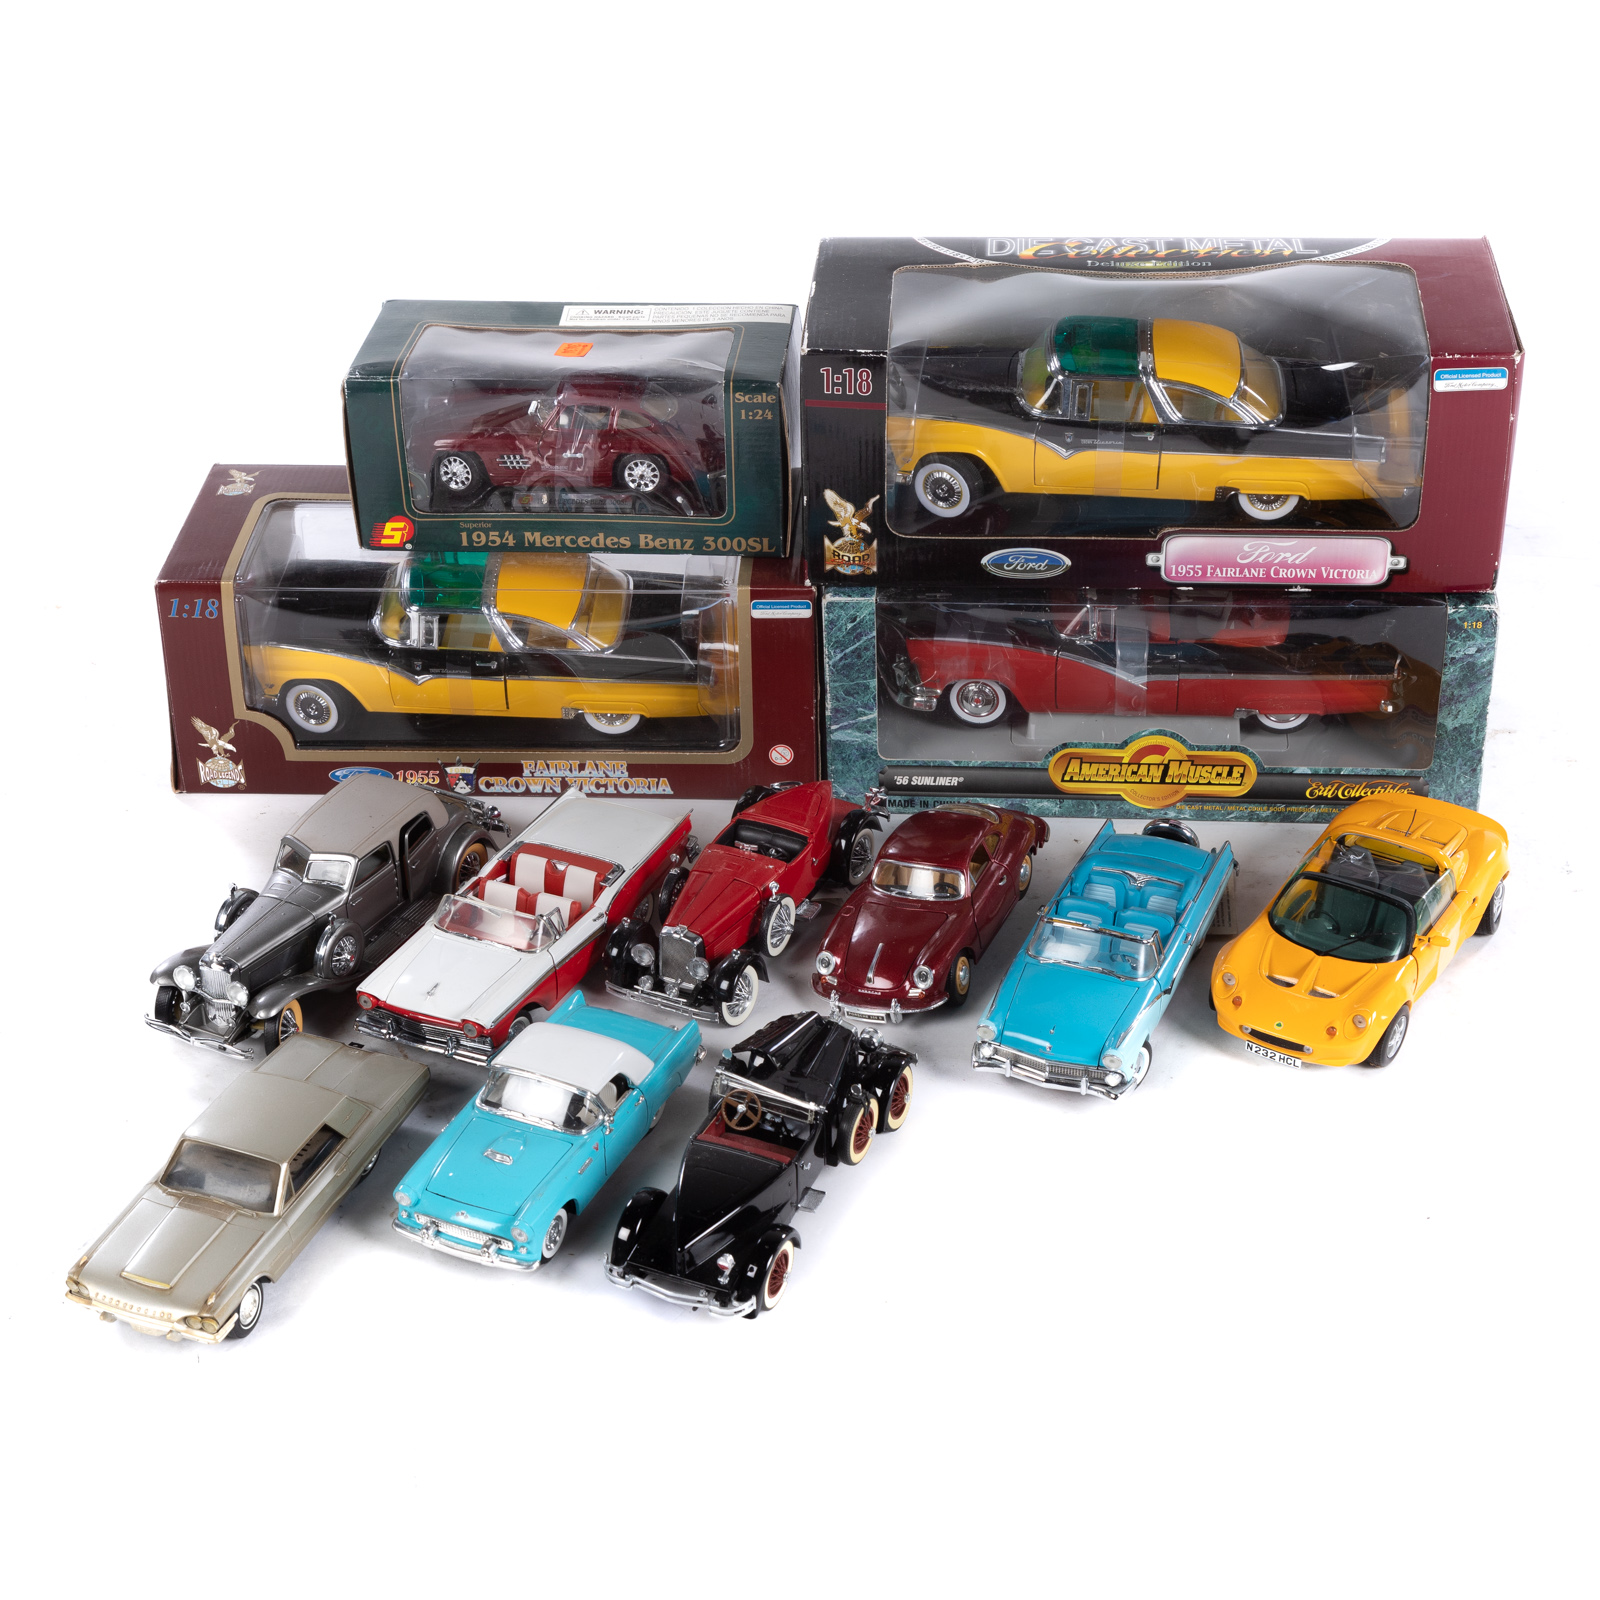 10 ASSORTED DIE-CAST CARS Includes